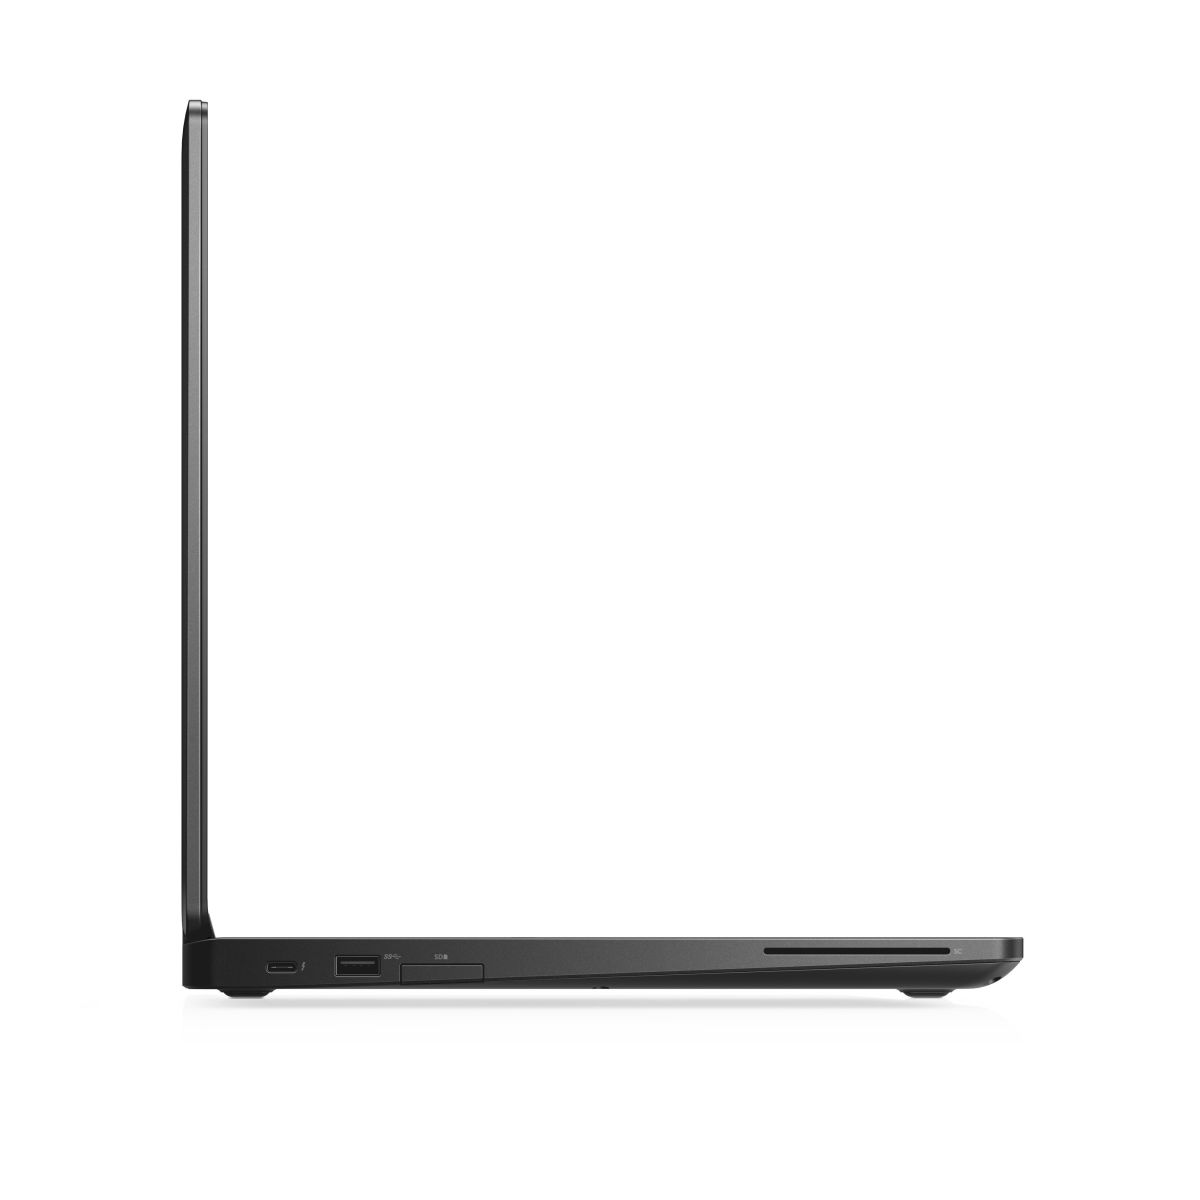 DELL Latitude 5591 - 5591-3522 laptop specifications